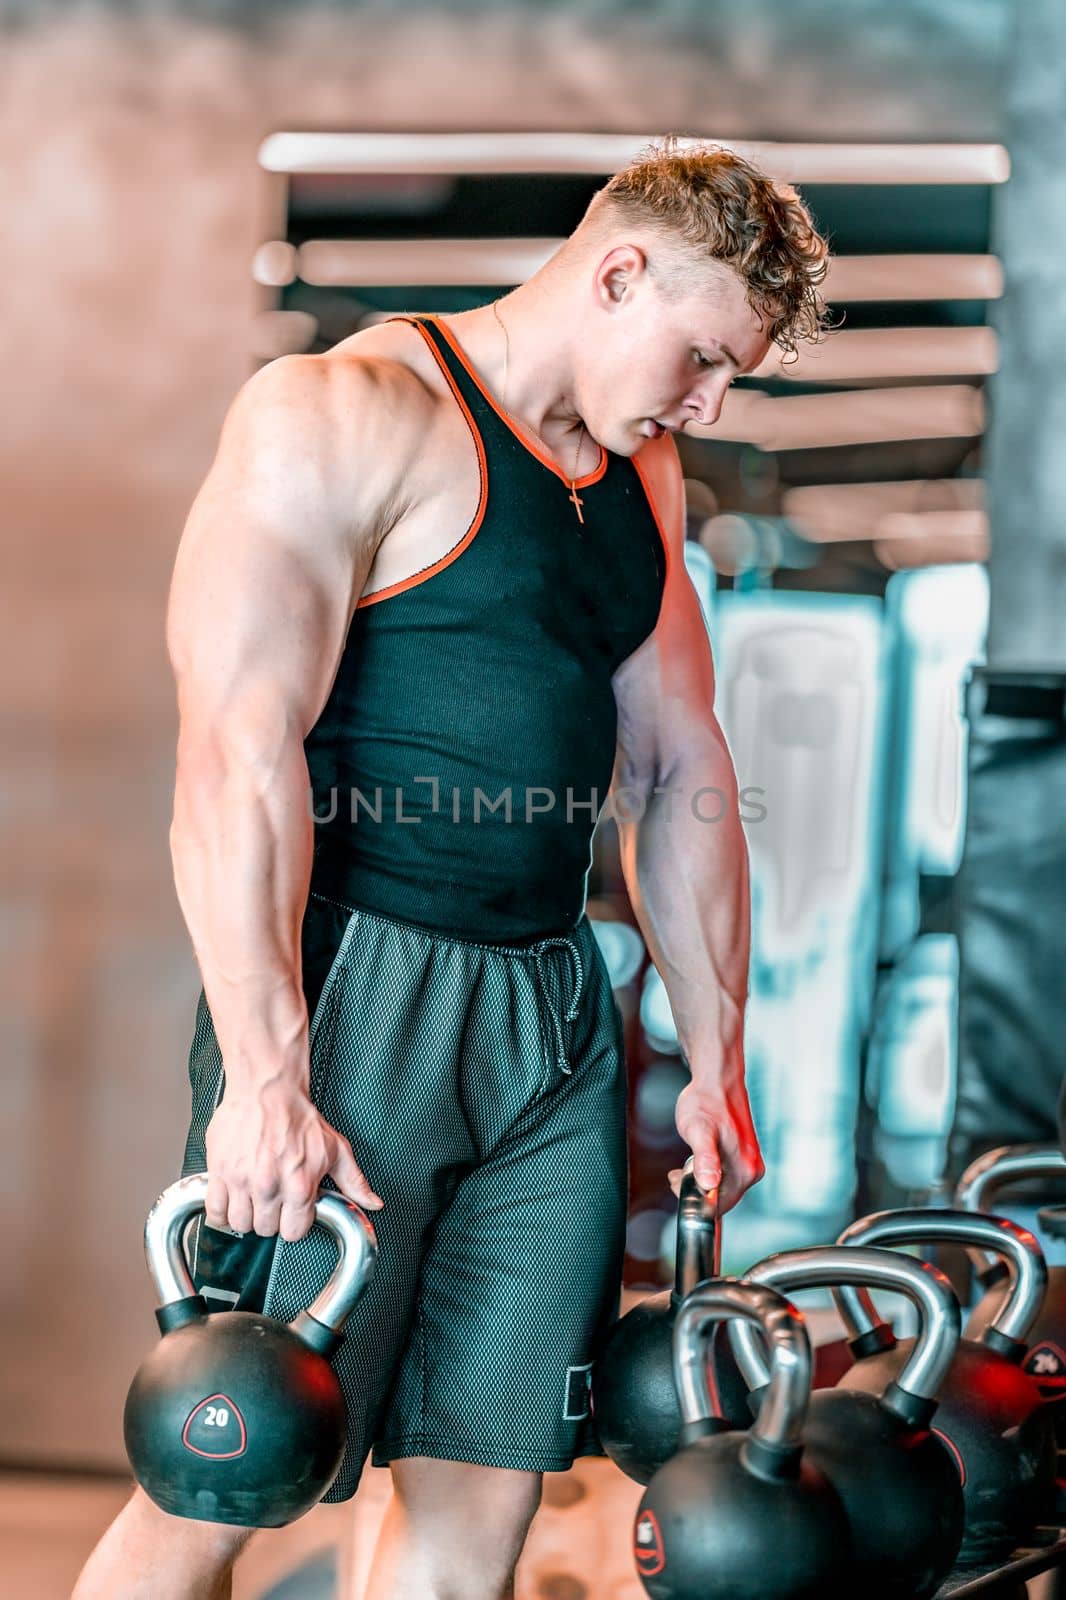 athlete uses kettlebells in rack at gym by Edophoto